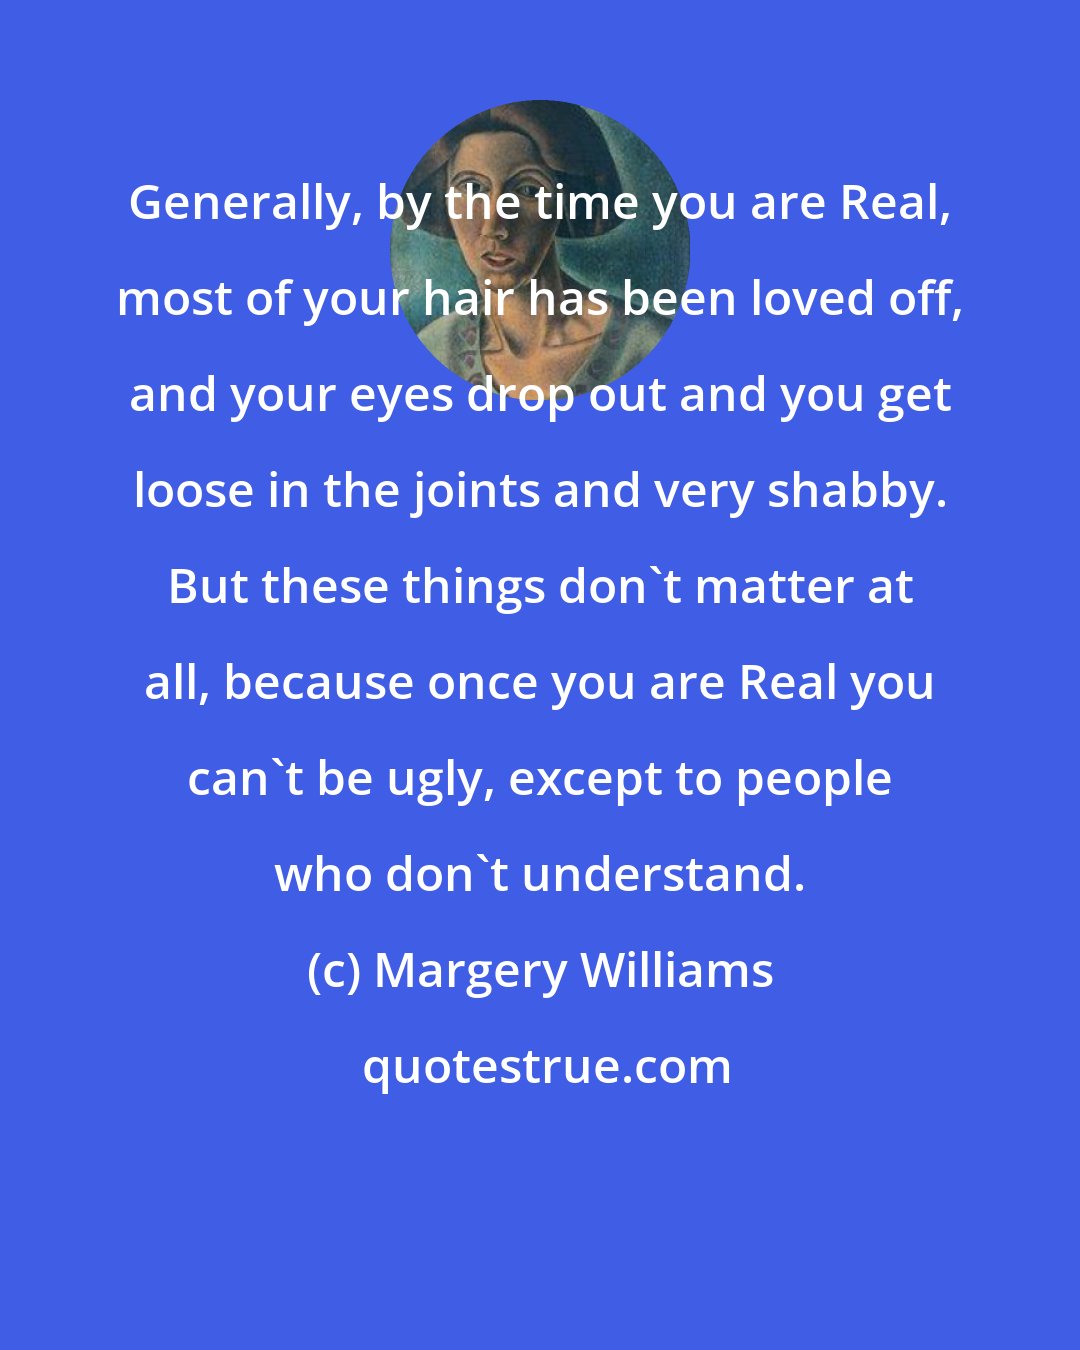 Margery Williams: Generally, by the time you are Real, most of your hair has been loved off, and your eyes drop out and you get loose in the joints and very shabby. But these things don't matter at all, because once you are Real you can't be ugly, except to people who don't understand.